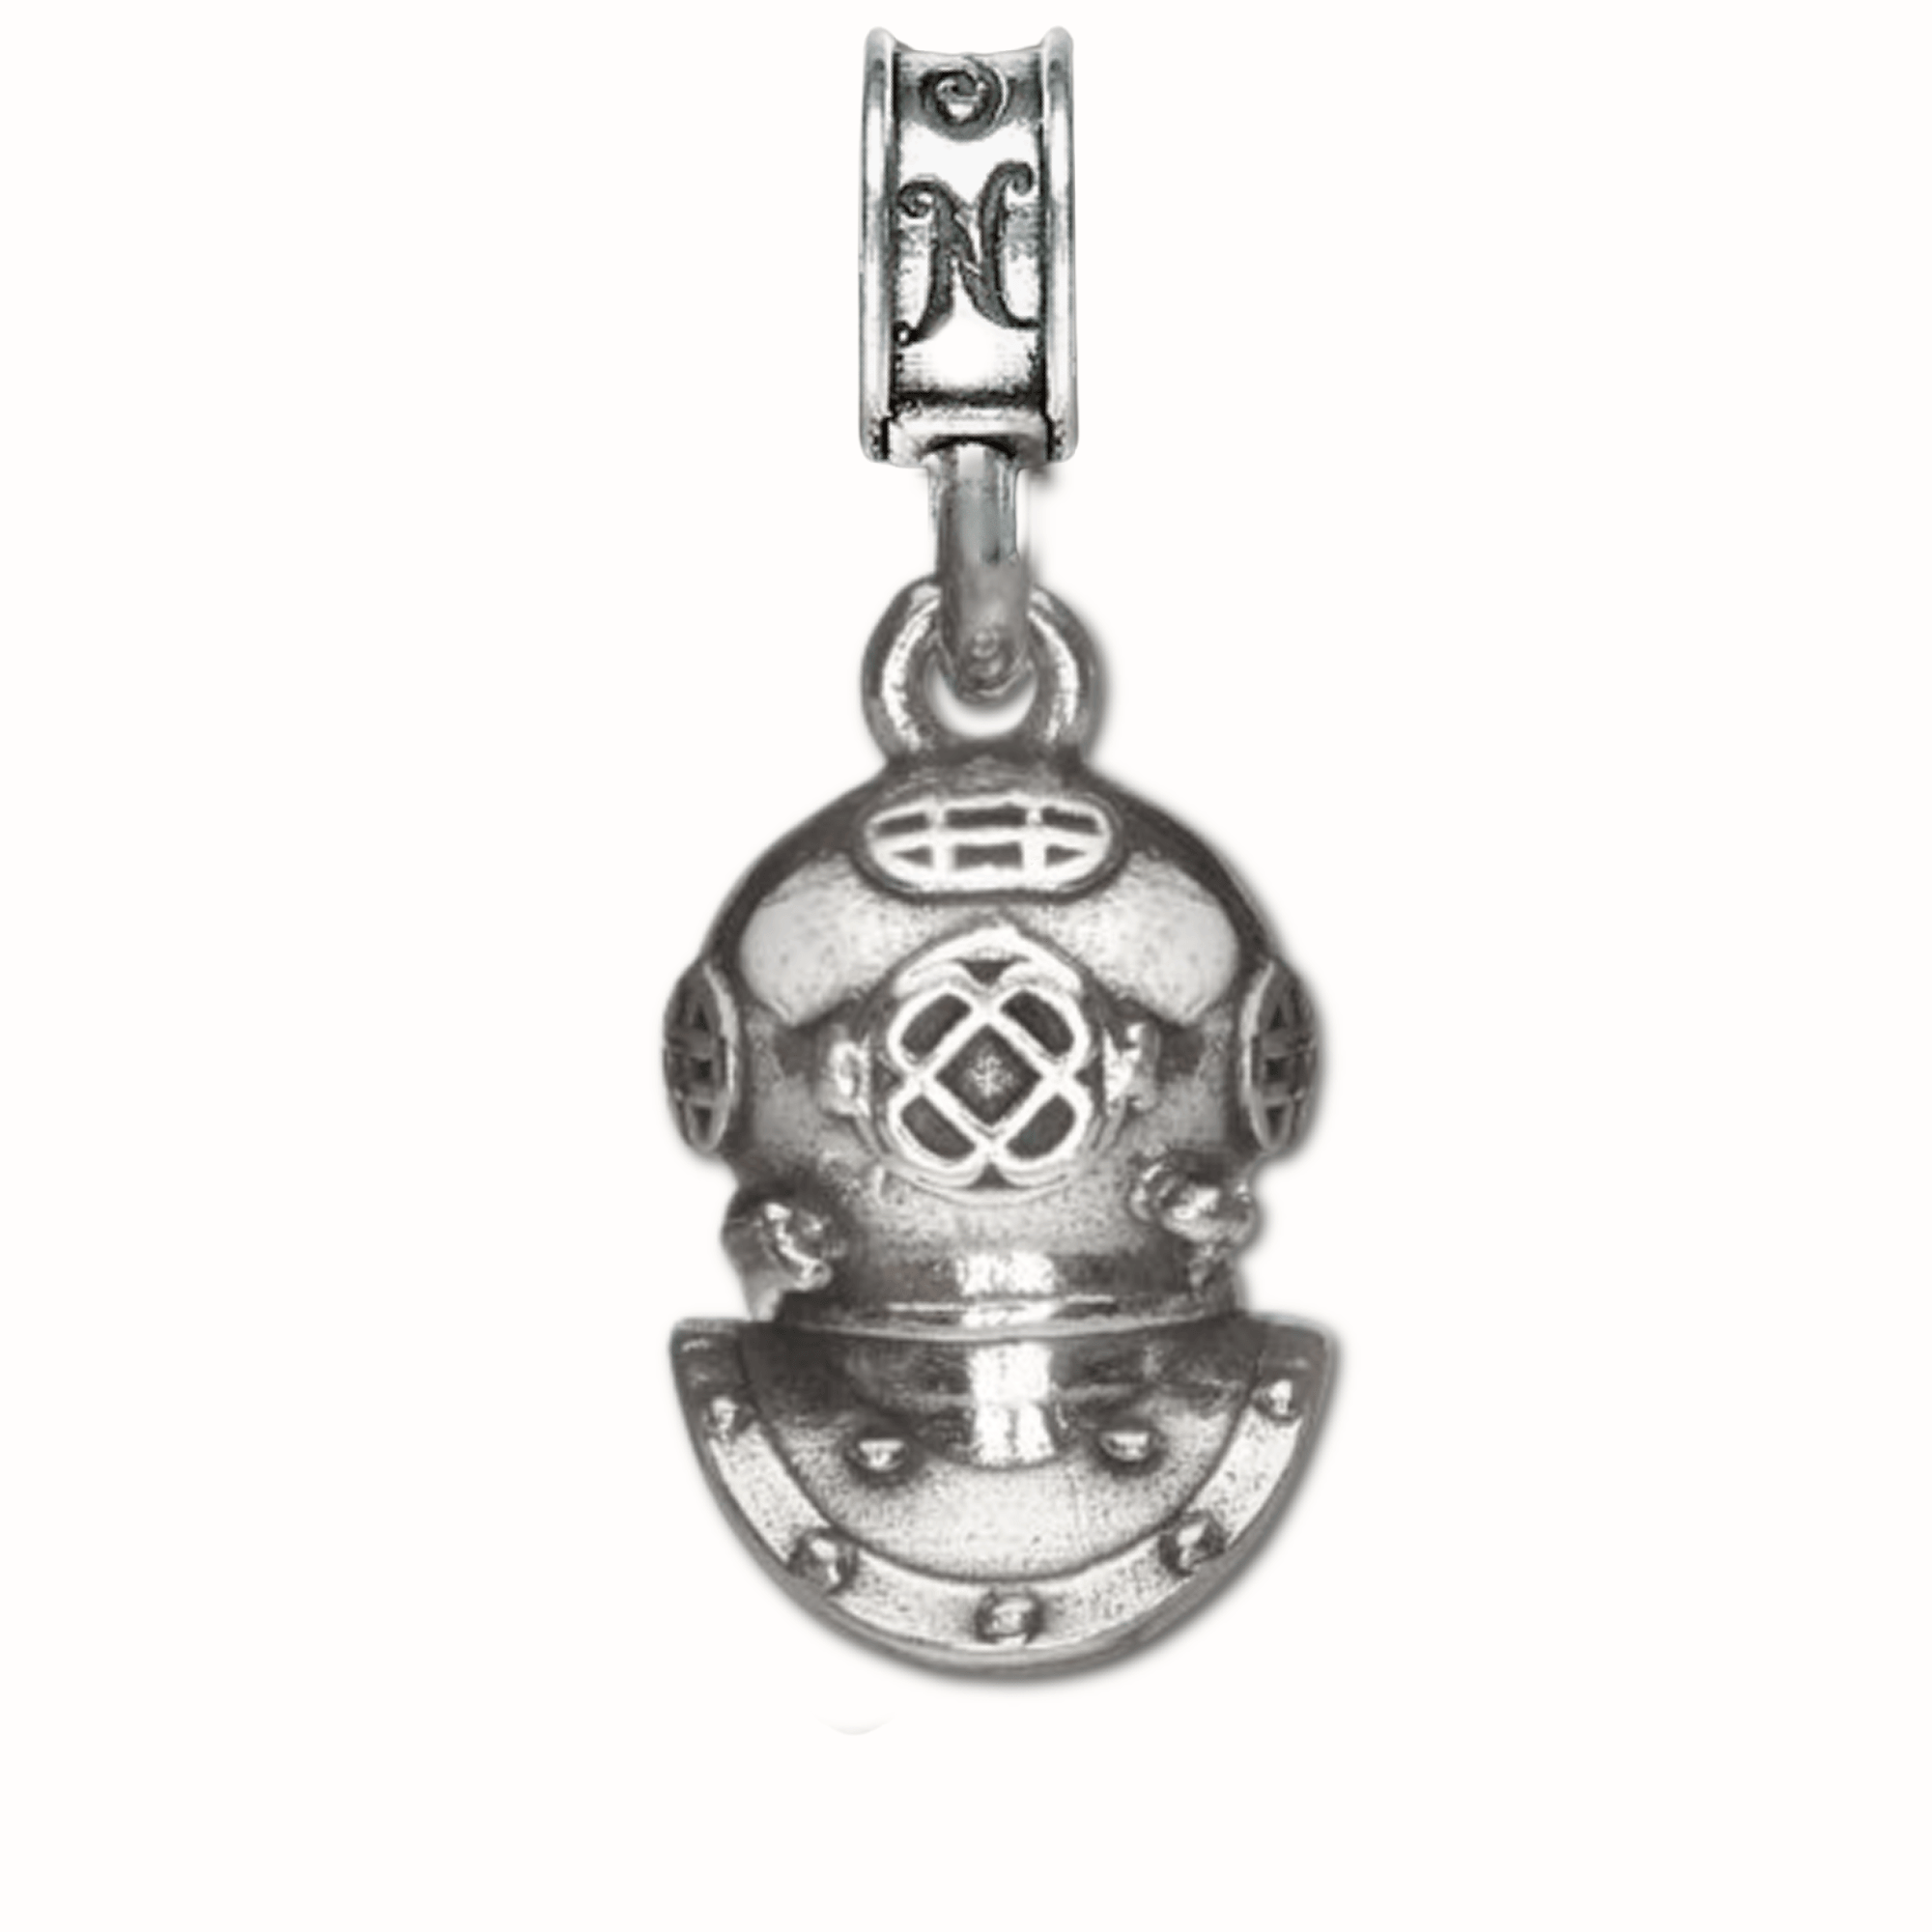 Military Jewelry, Military Charms, Military Gifts, USMC, USAF, NAVY, Dive Helmet Charm